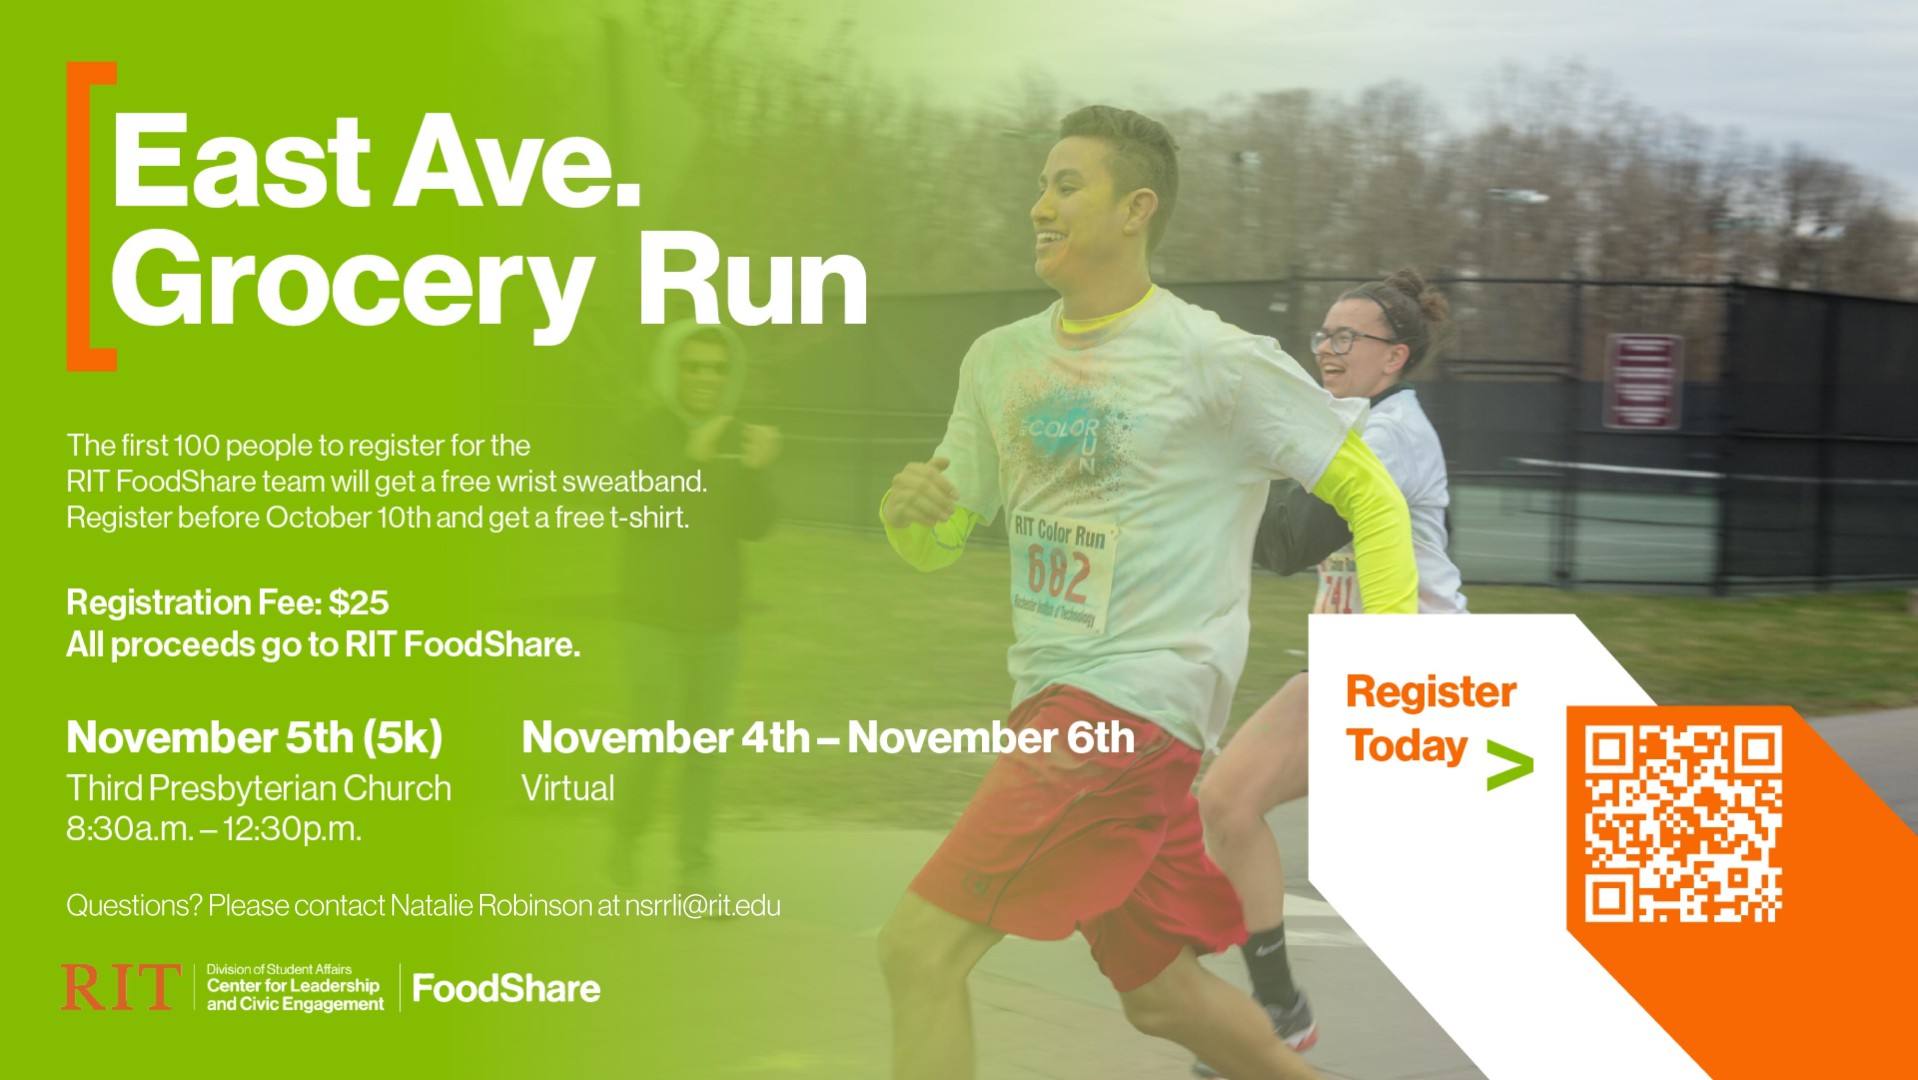 People running in a 5k race. QR code in the lower right corner for people to register for East Ave Grocery Run on November 5th. 